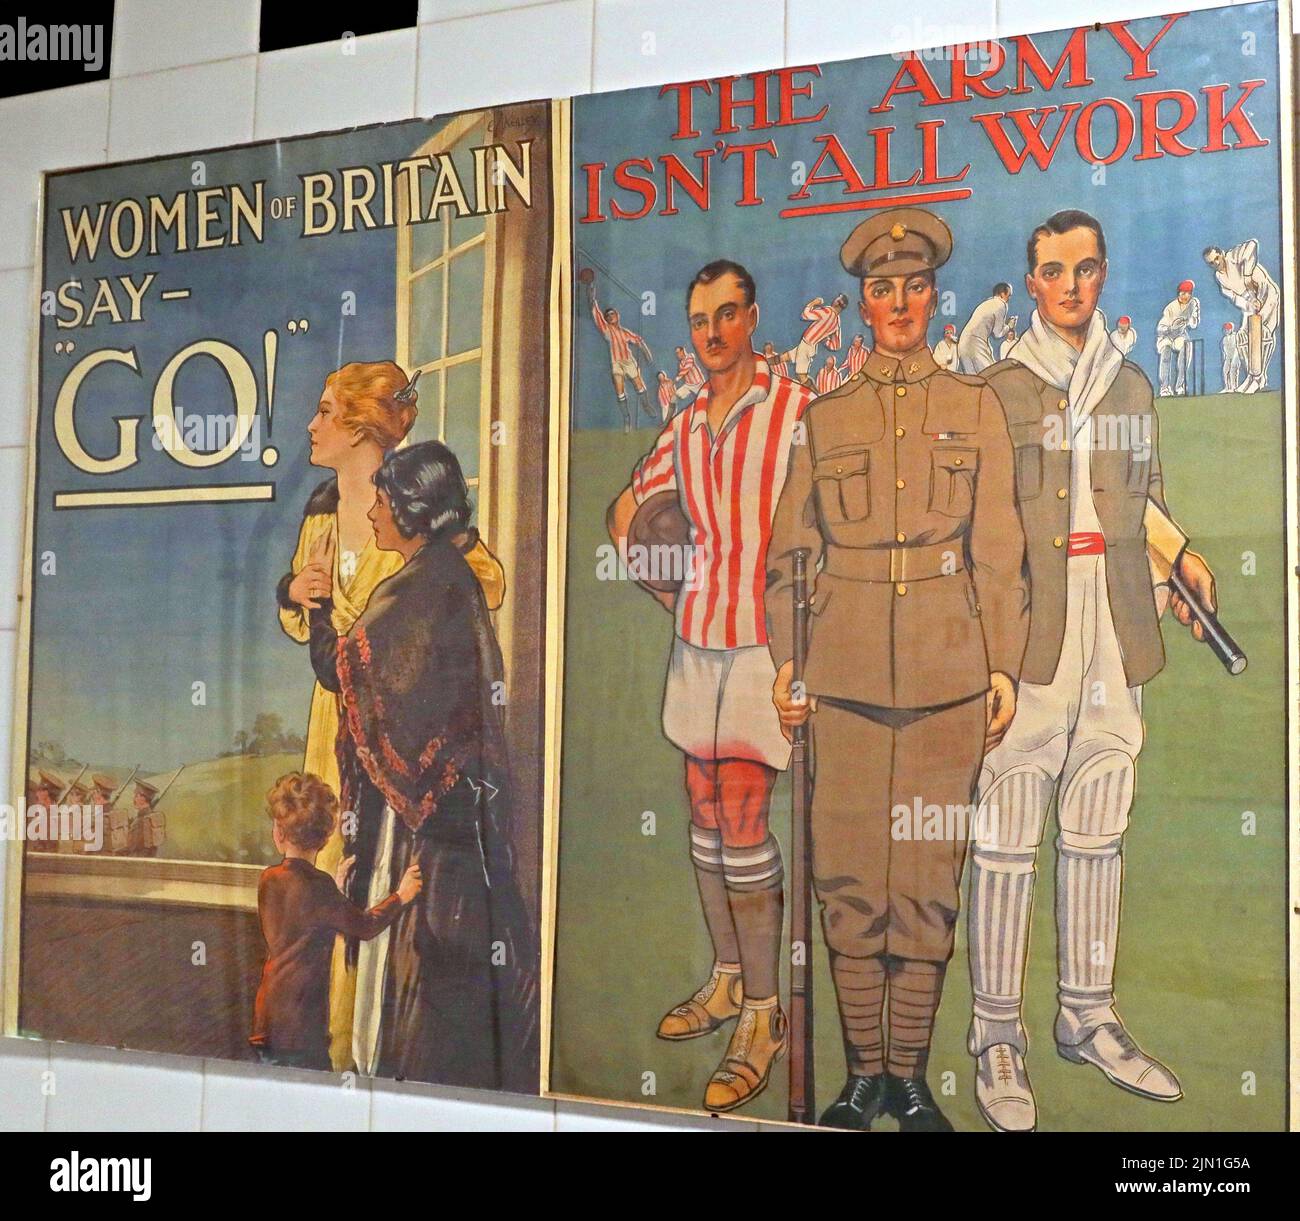 UK, British Army recruitment posters - Women of Britain say Go, The Army isn't all work, Chester, Cheshire, England, UK, CH1 1AB Stock Photo